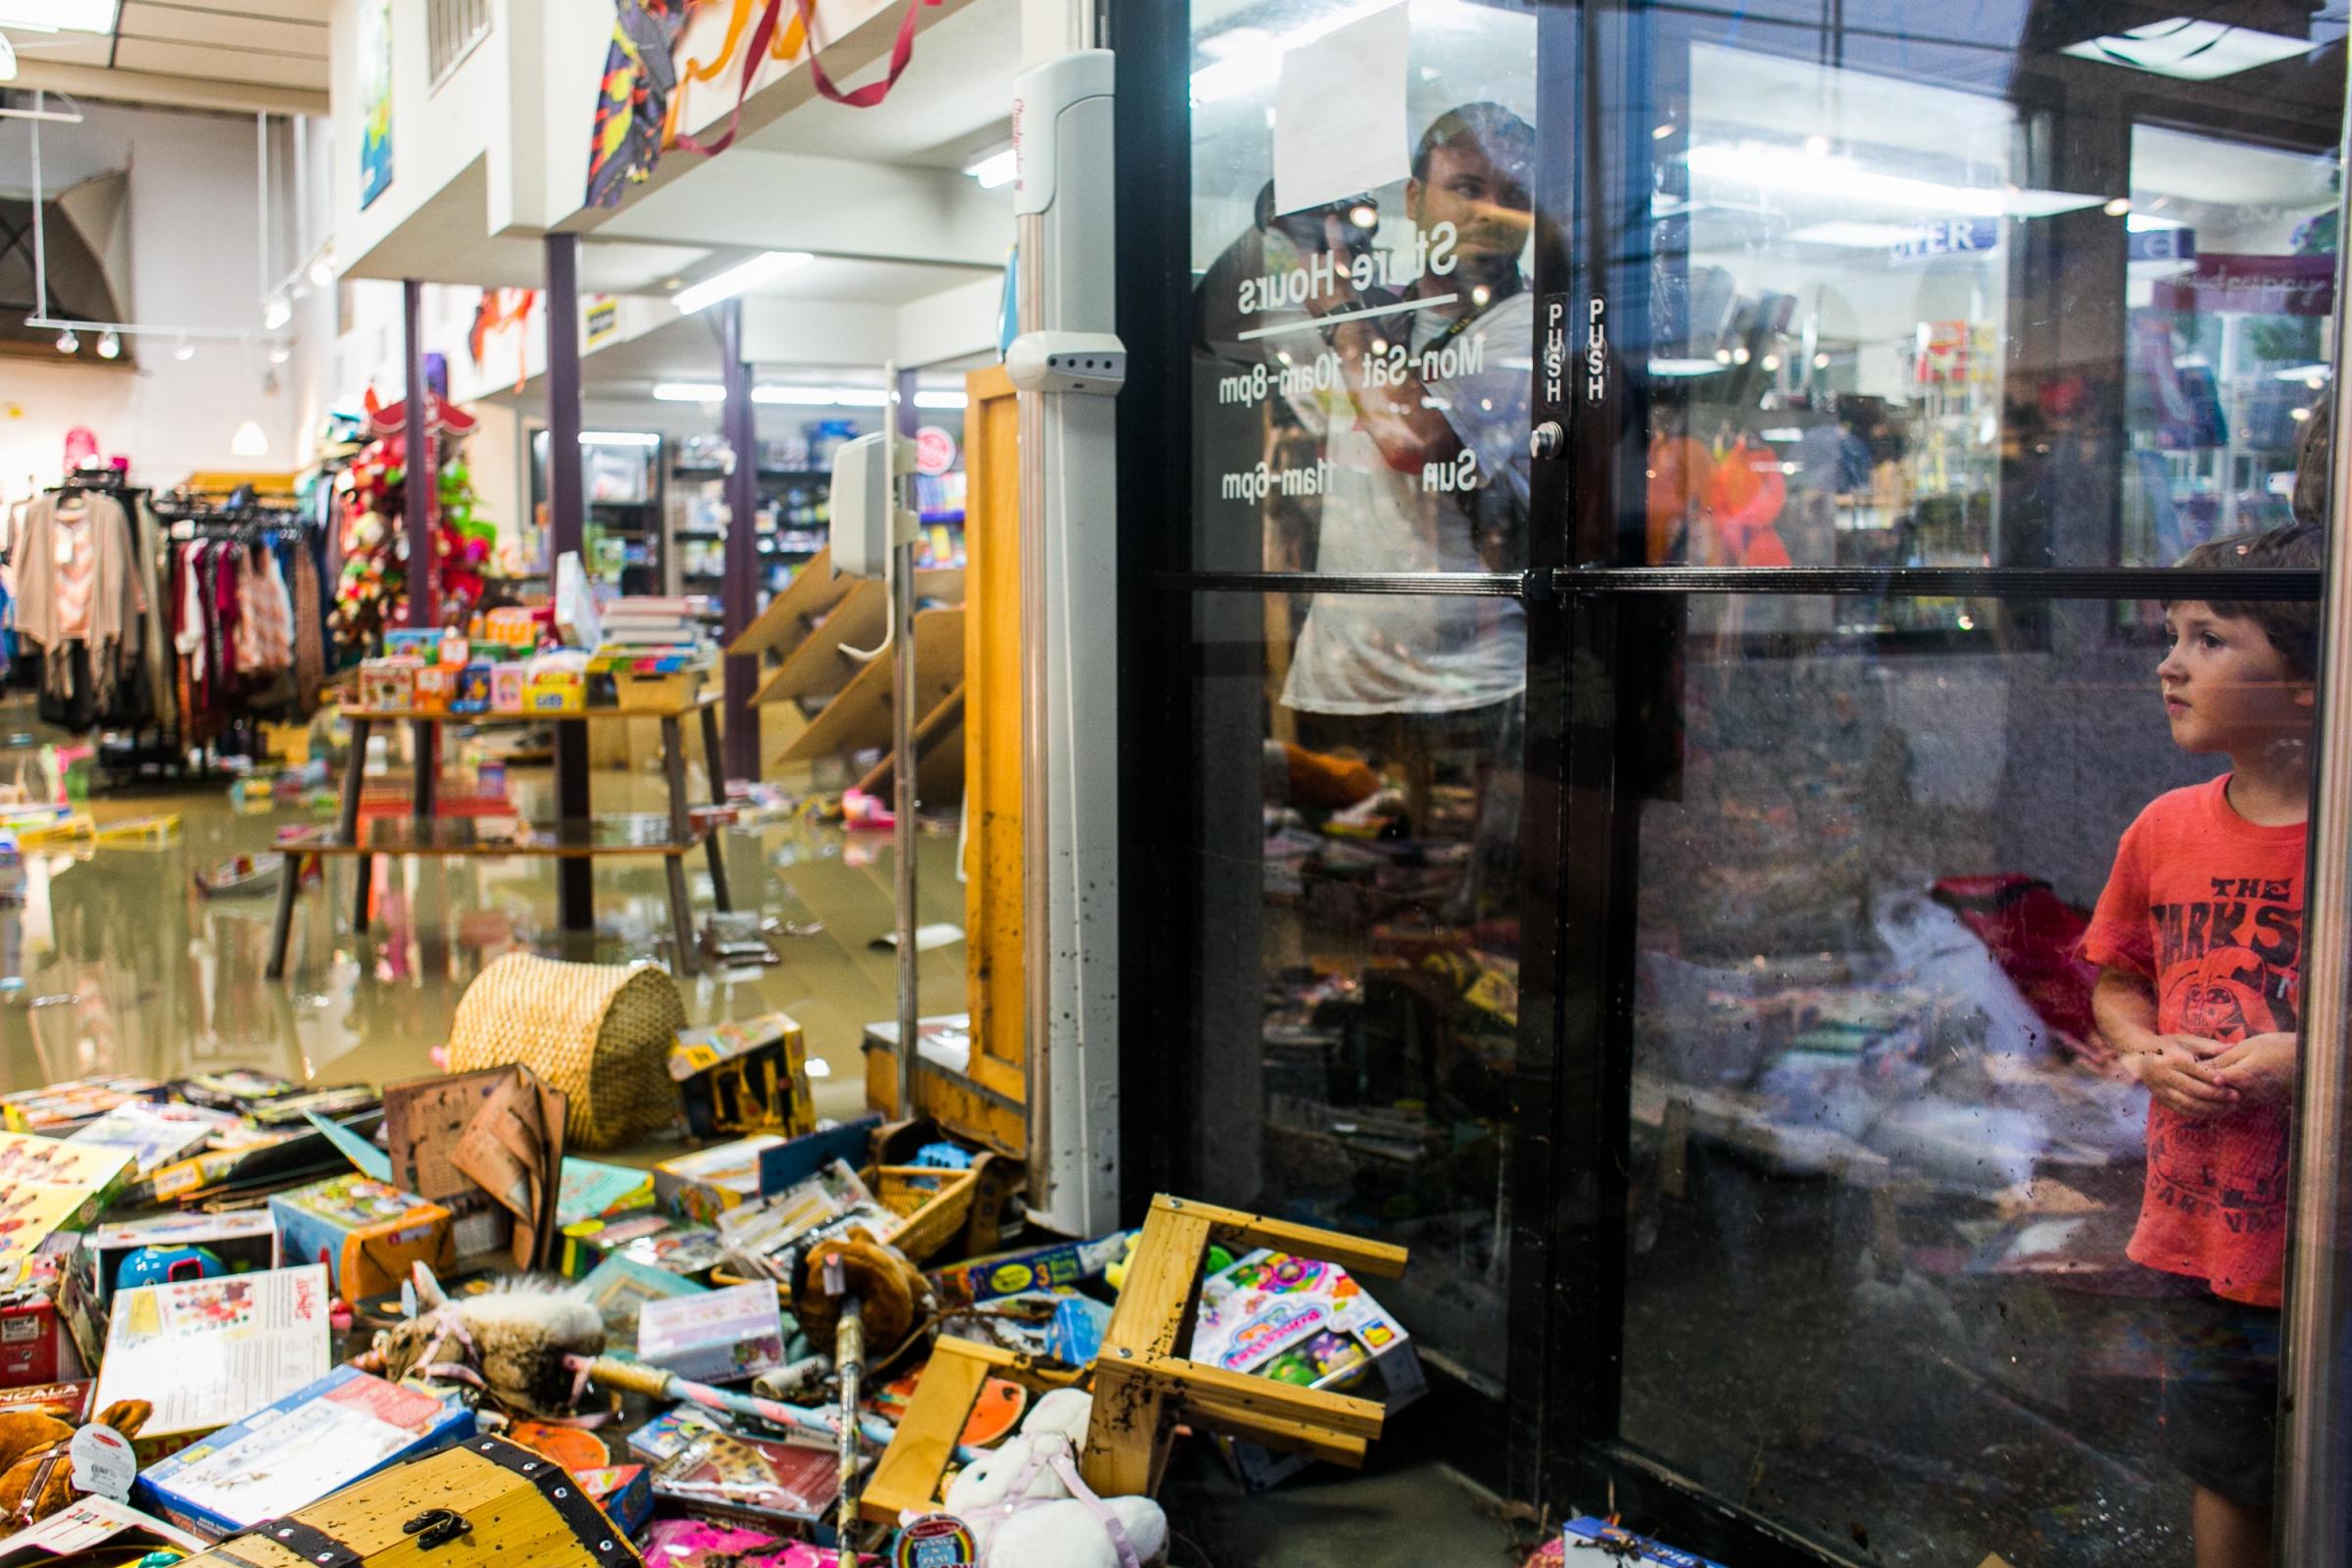 Lucas Rivas looks into the flooded Whole Earth Provisions Company after days of heavy rain in Austin on May 25, 2015.